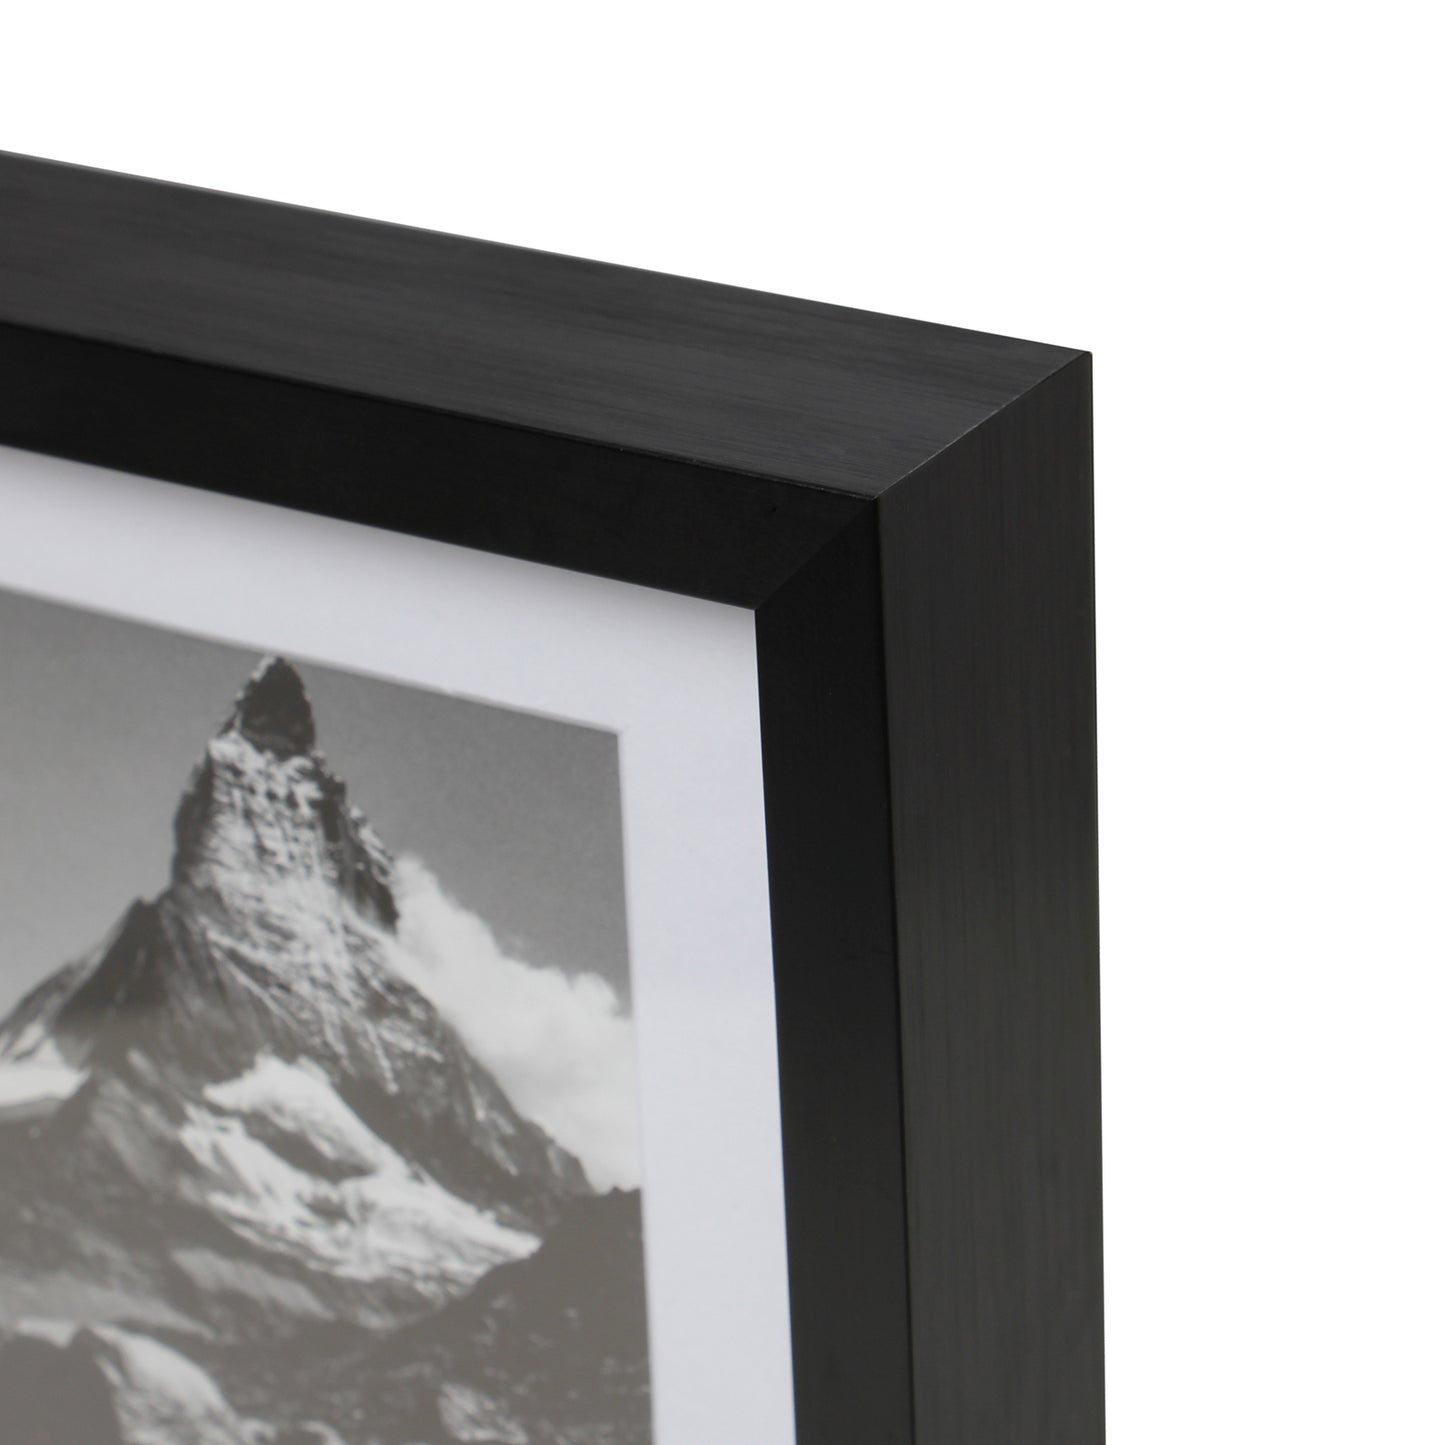 13" x 19" Deluxe Black Aluminum Contemporary Picture Frame, 11" x 17" Matted